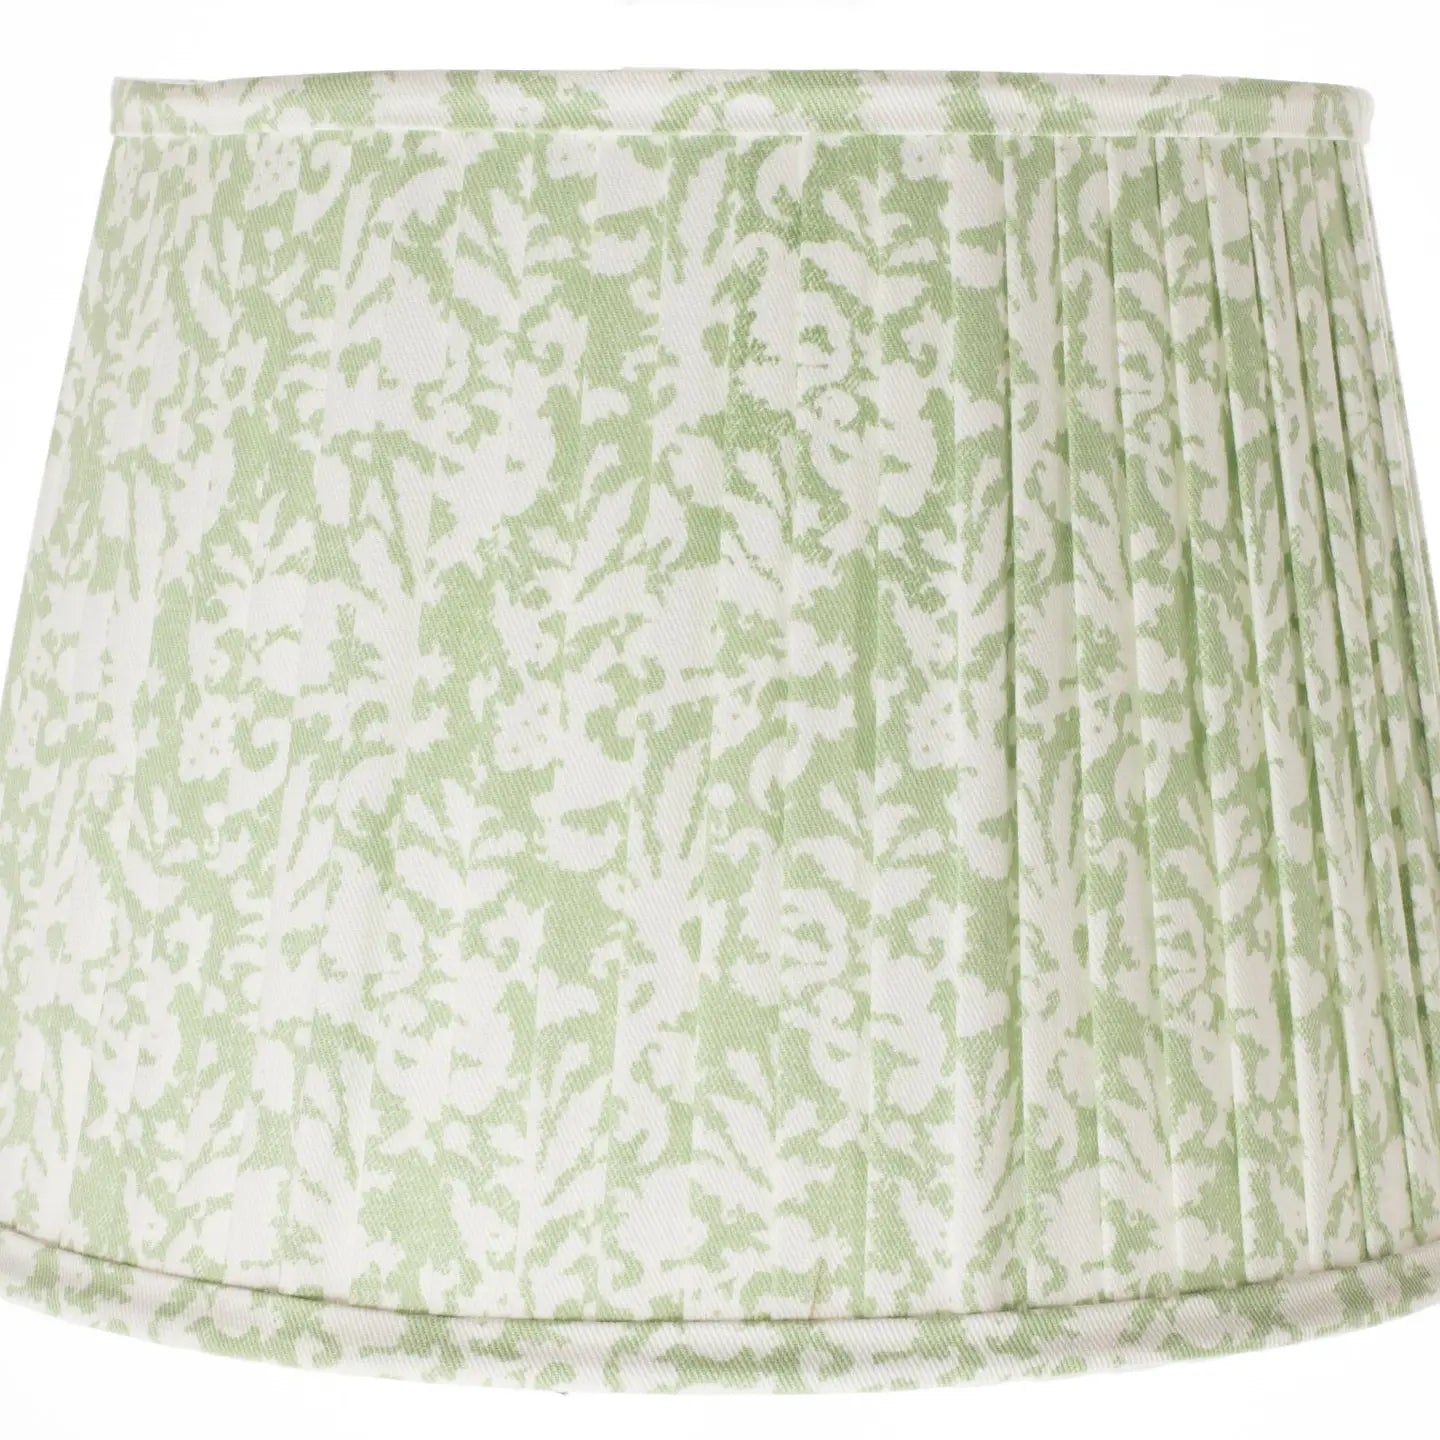 Pleated Lampshade - Green Floral